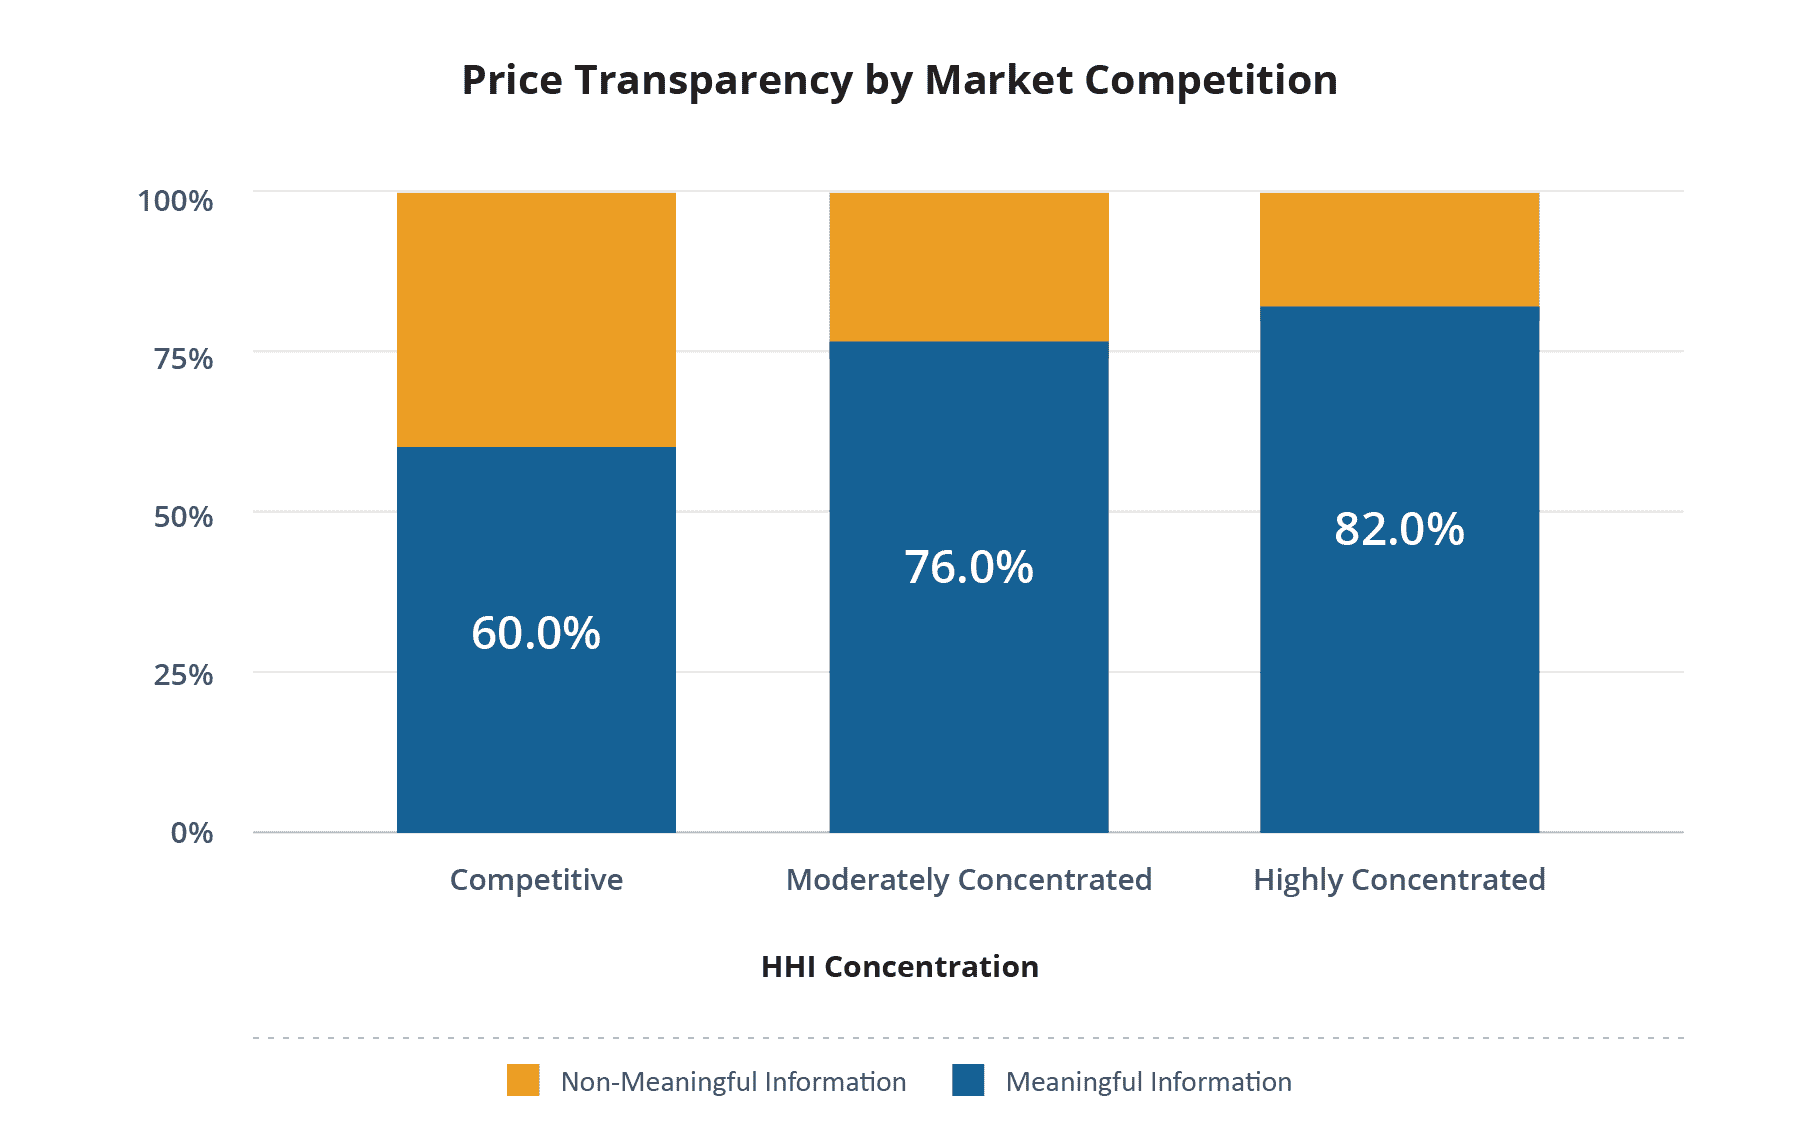 CareJourney Price Transparency by Market Competition